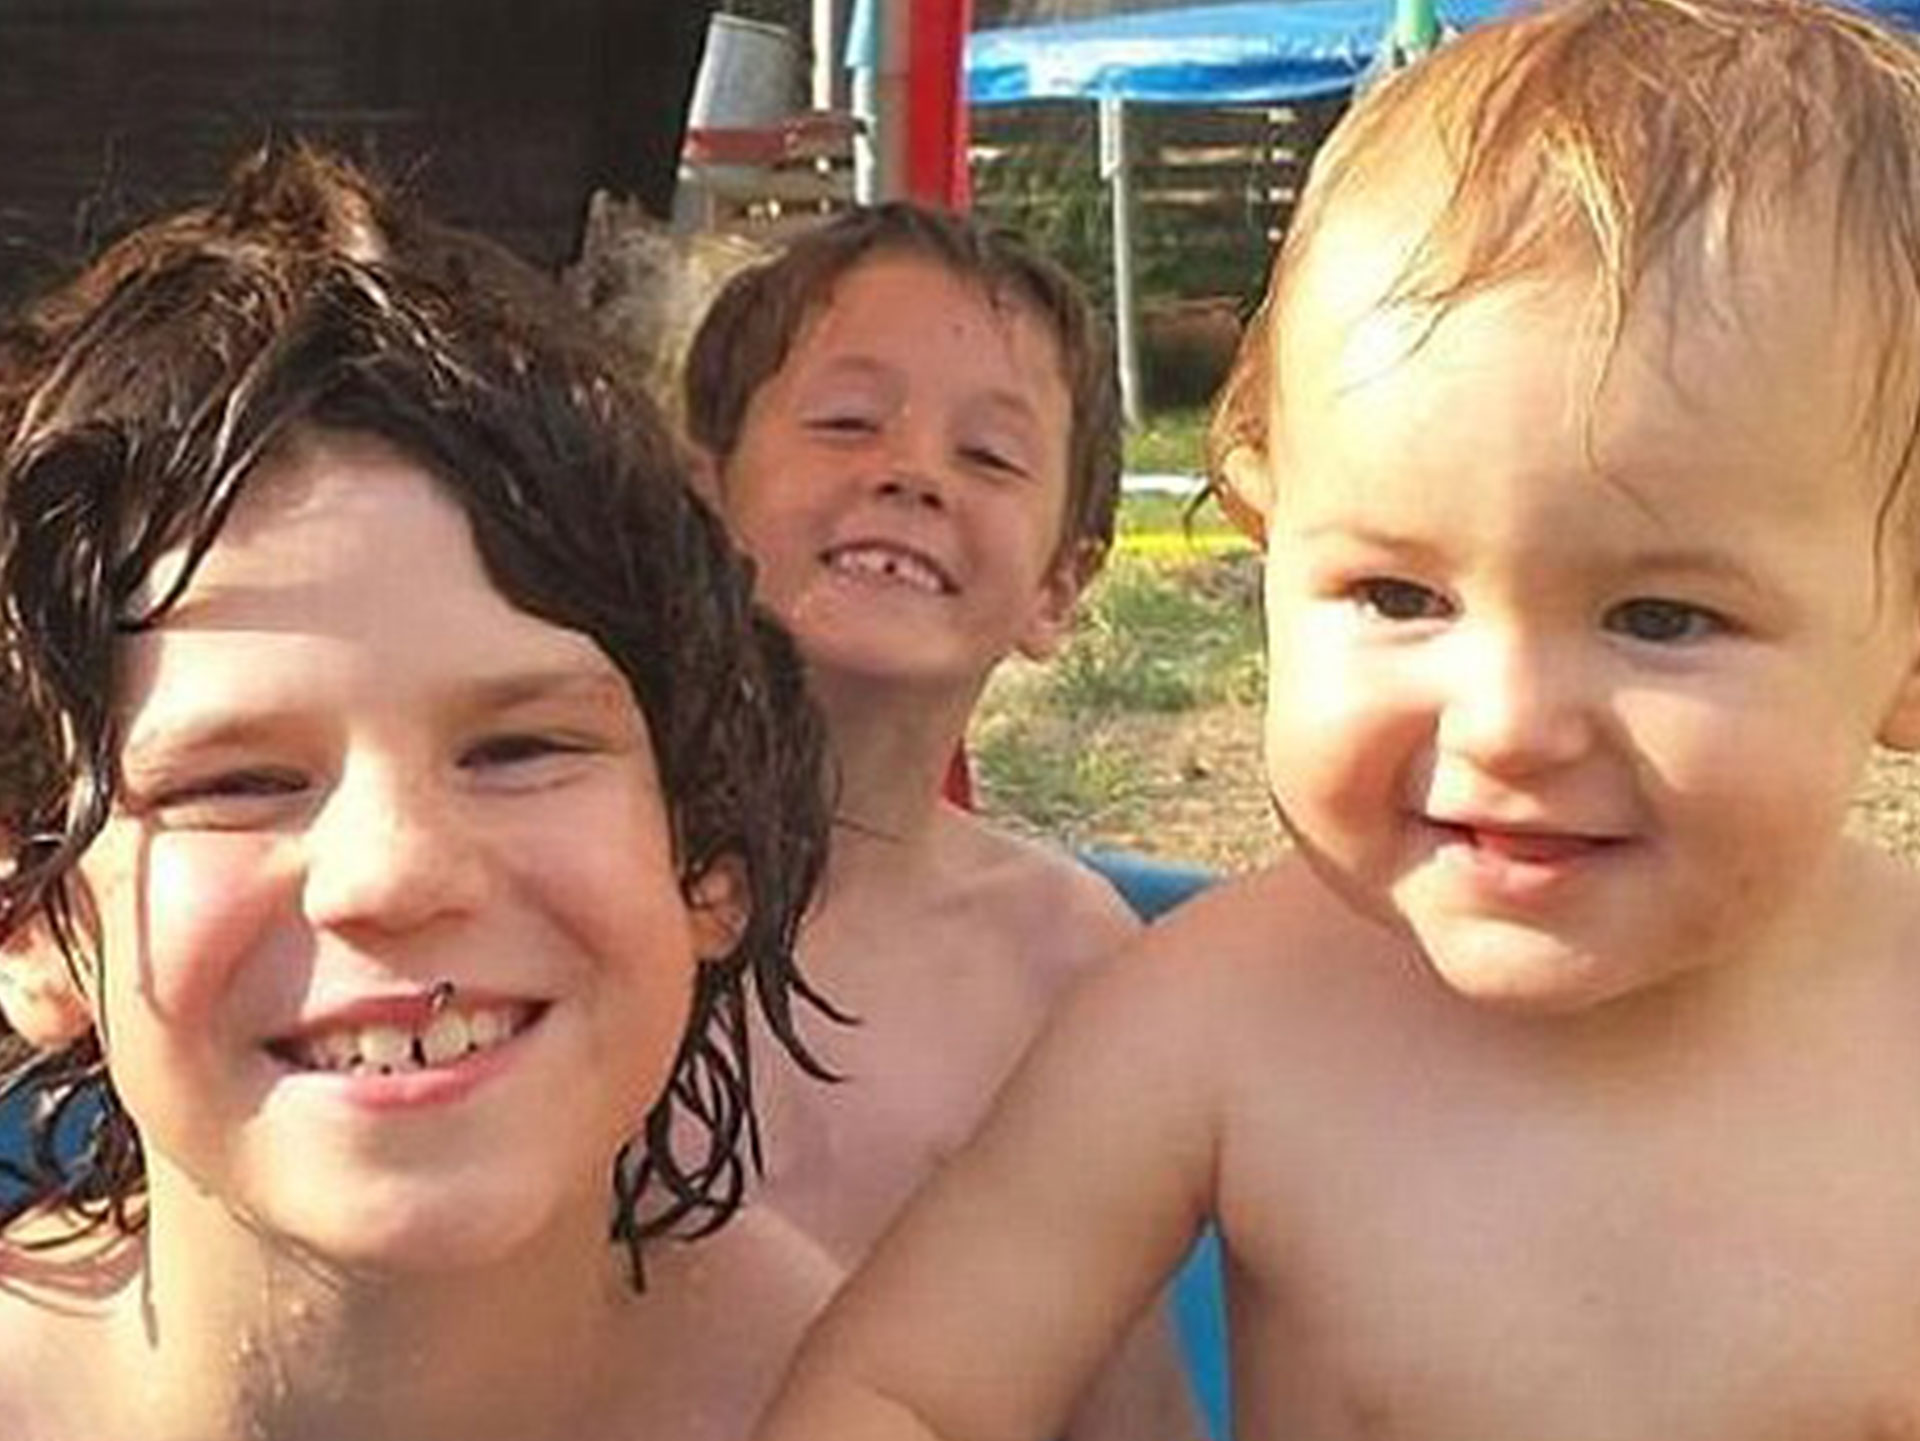 Parents were treated for shock after losing two sons in “traumatic” Dubbo crash